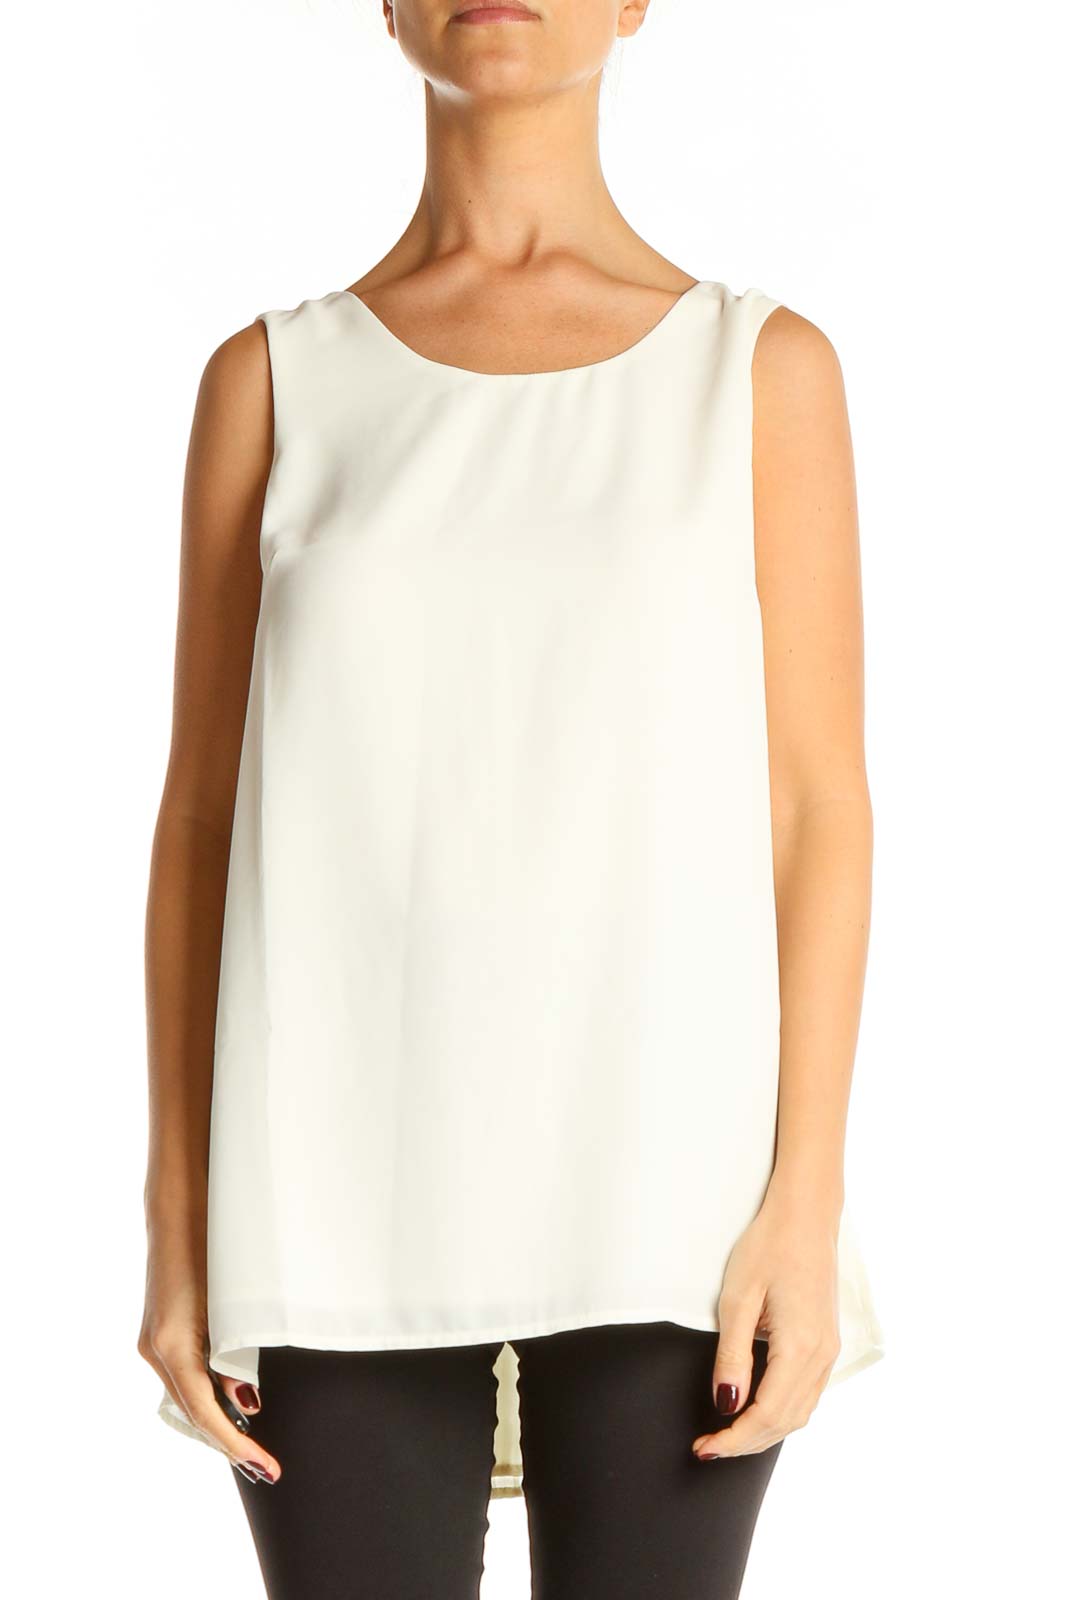 White Chic Tank Top Front